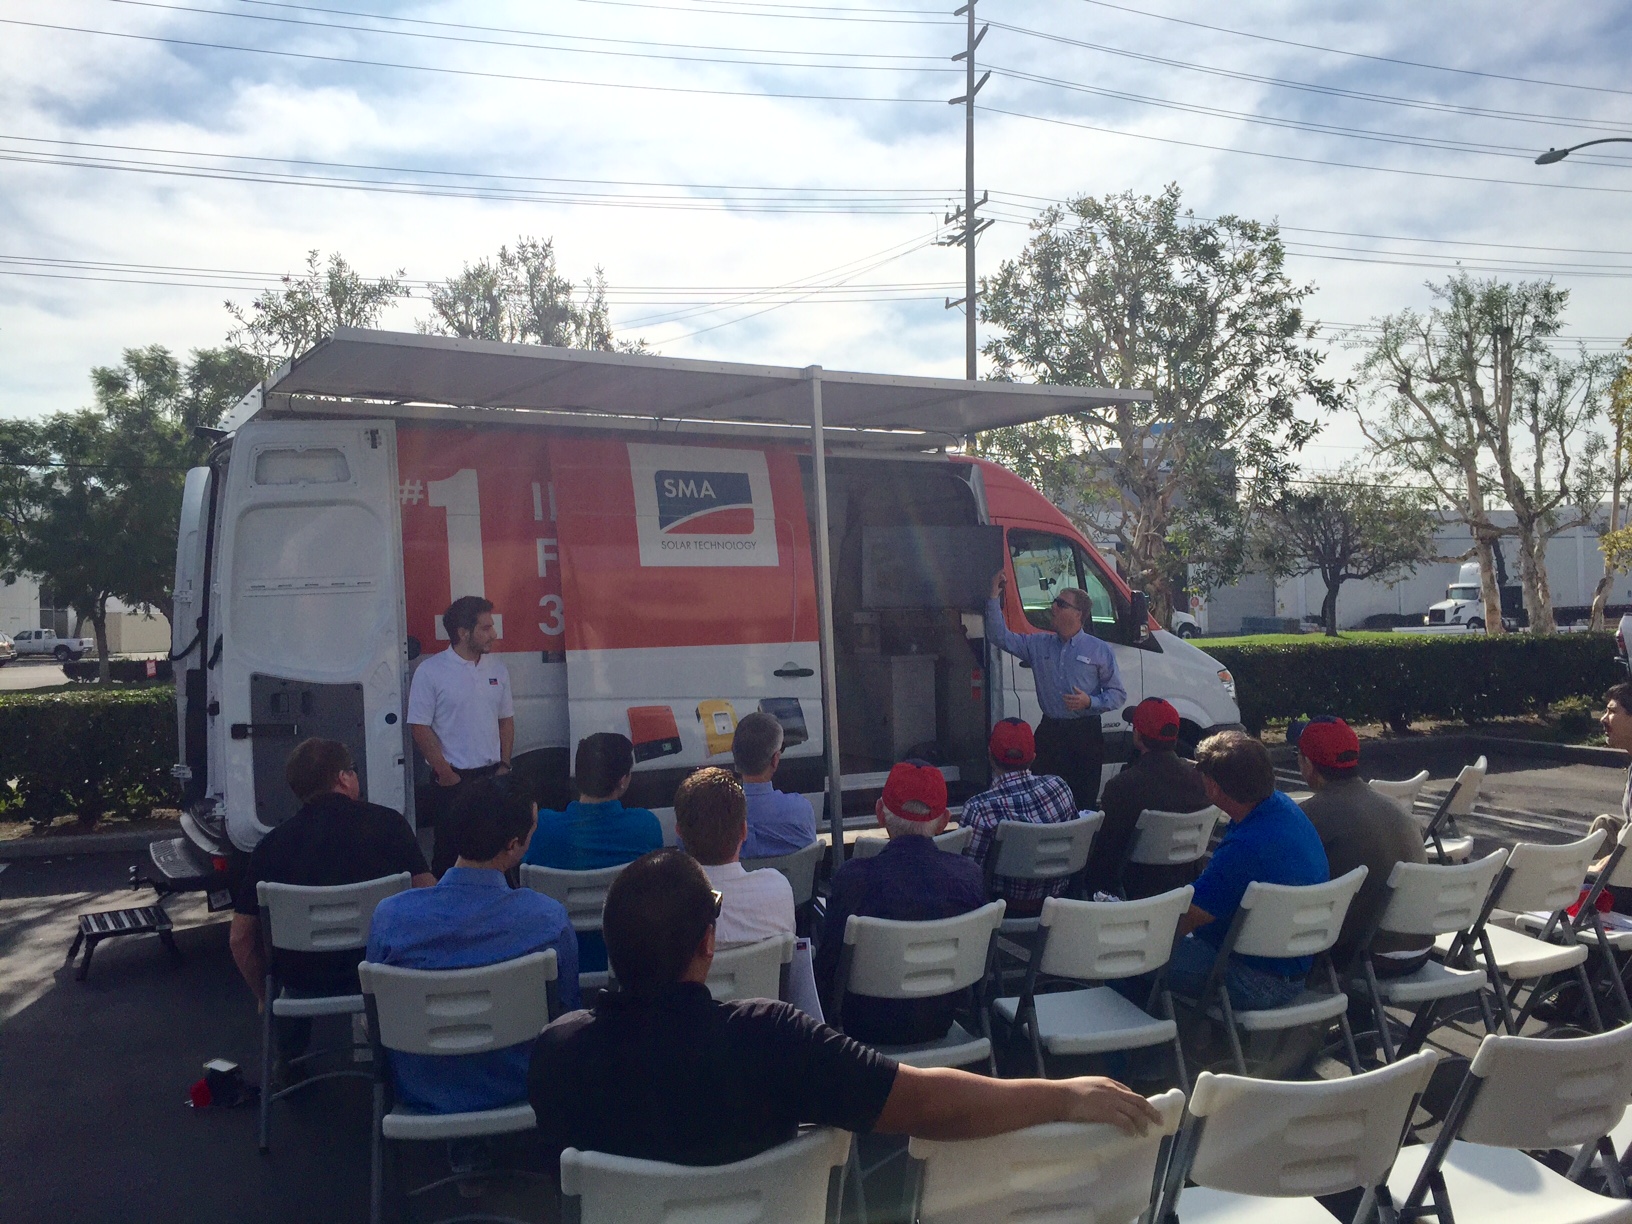 The scene from the More Power, More Profit Tour's stop in Southern California.